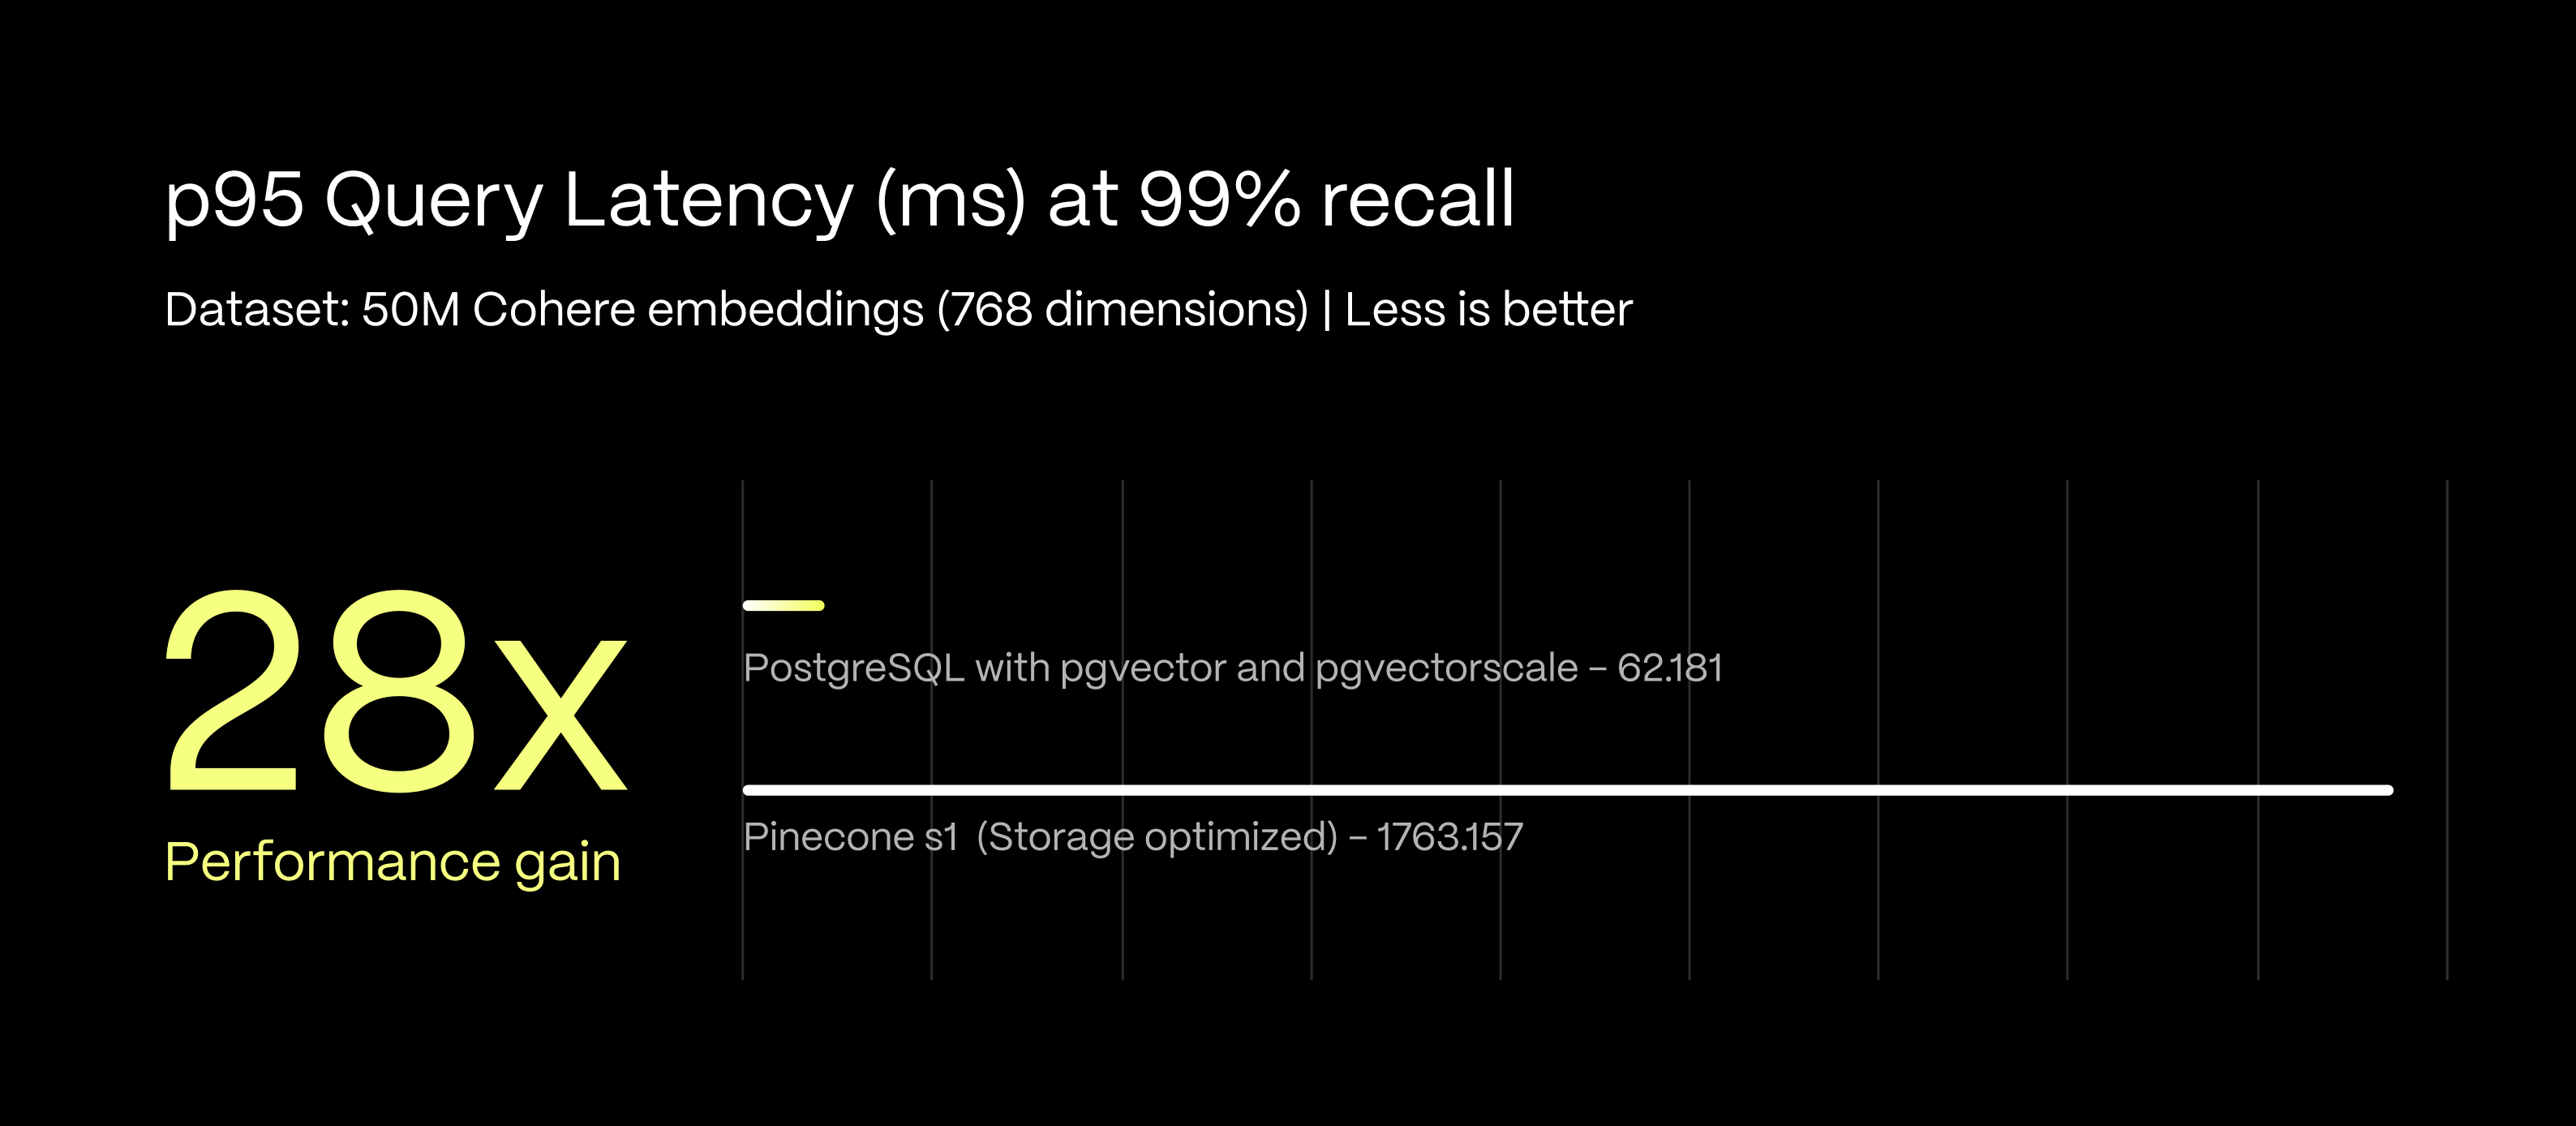 PostgreSQL with pgvector and pgvectorscale extensions outperformed Pinecone’s s1 pod-based index type, offering 28x lower p95 latency.